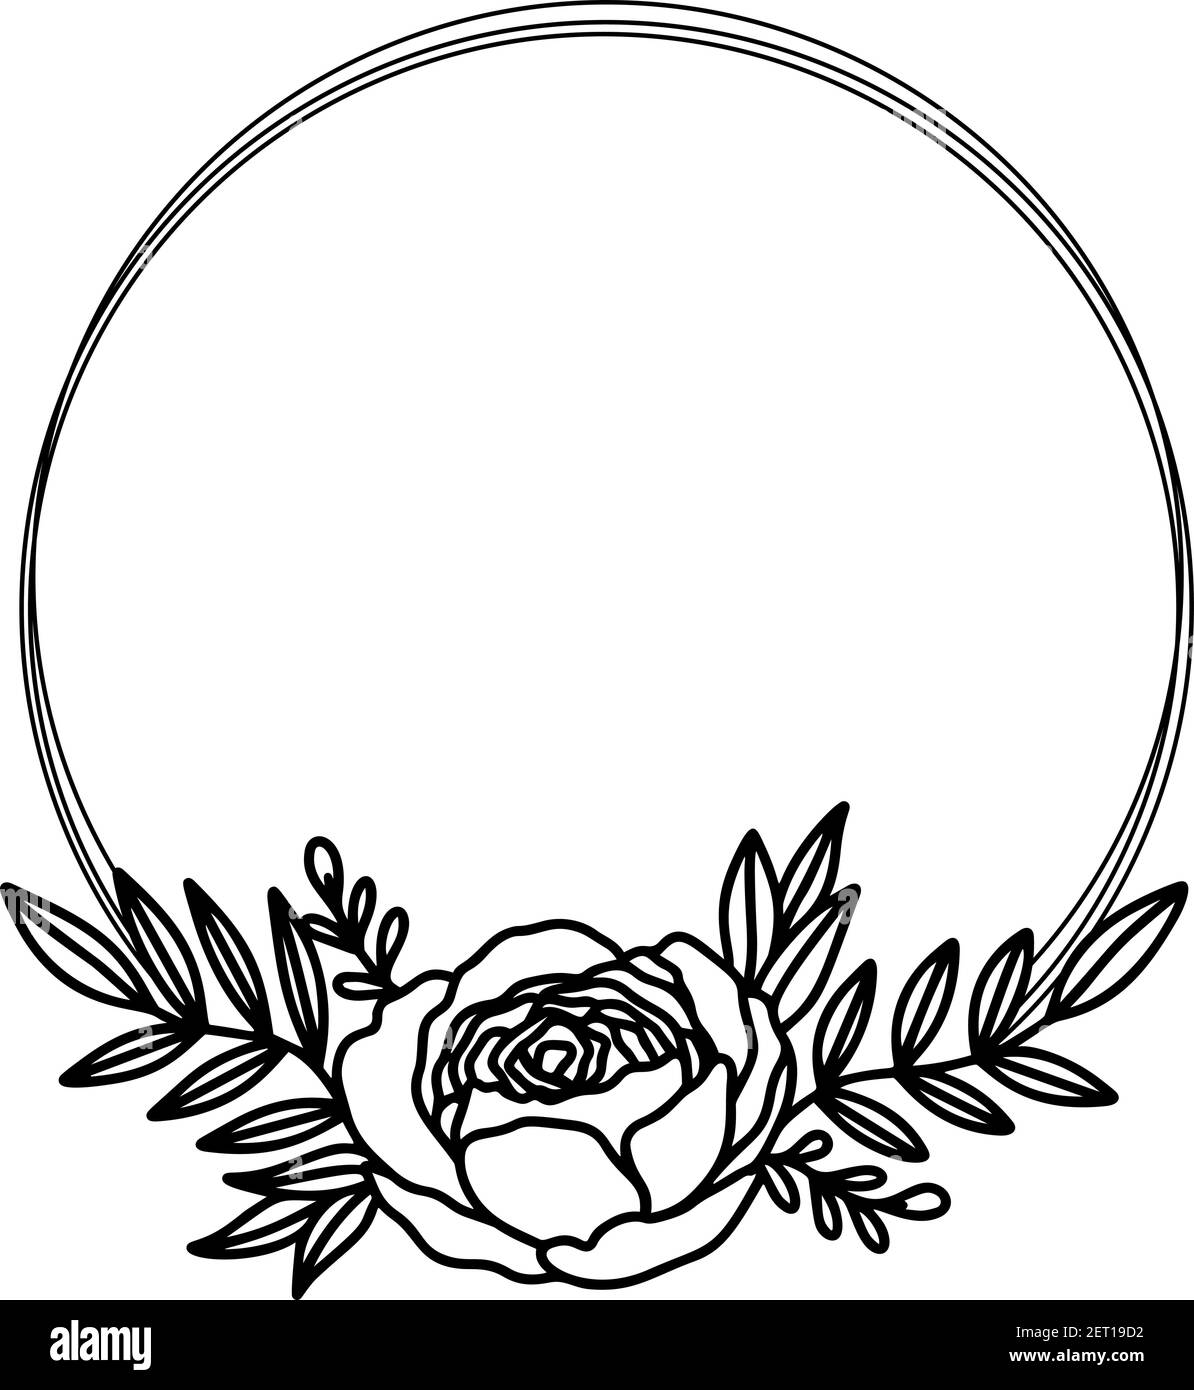 Floral Round Frame Drawing Leaves On Stock Illustration 617165039   Shutterstock